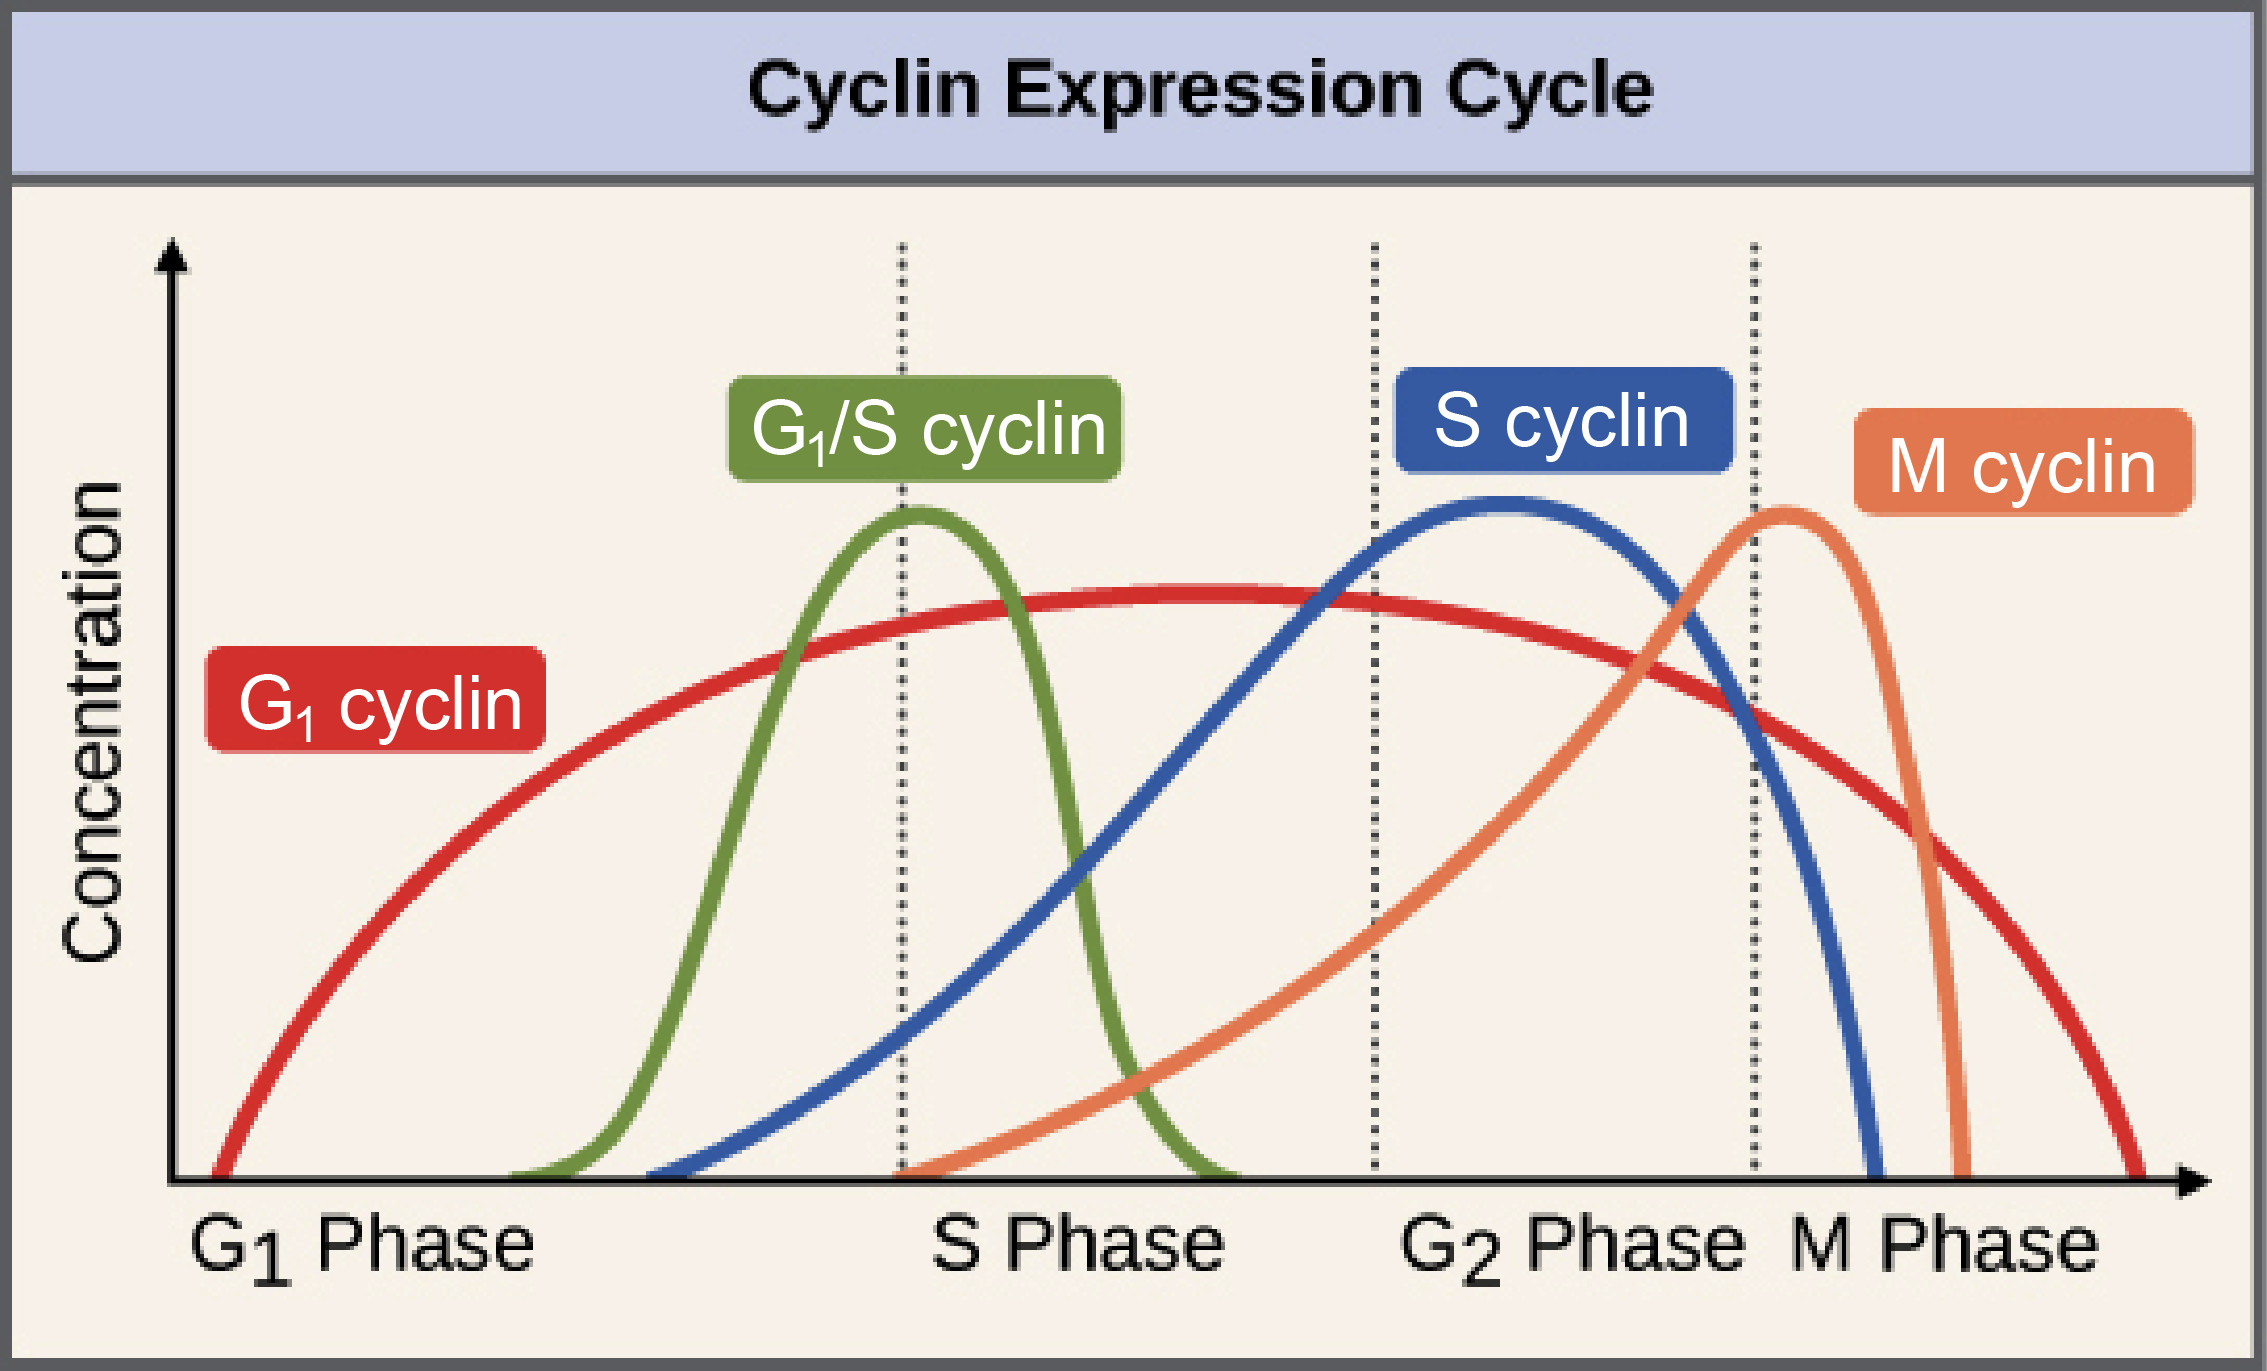 A graph of concentrations of different cyclins during the cell cycle